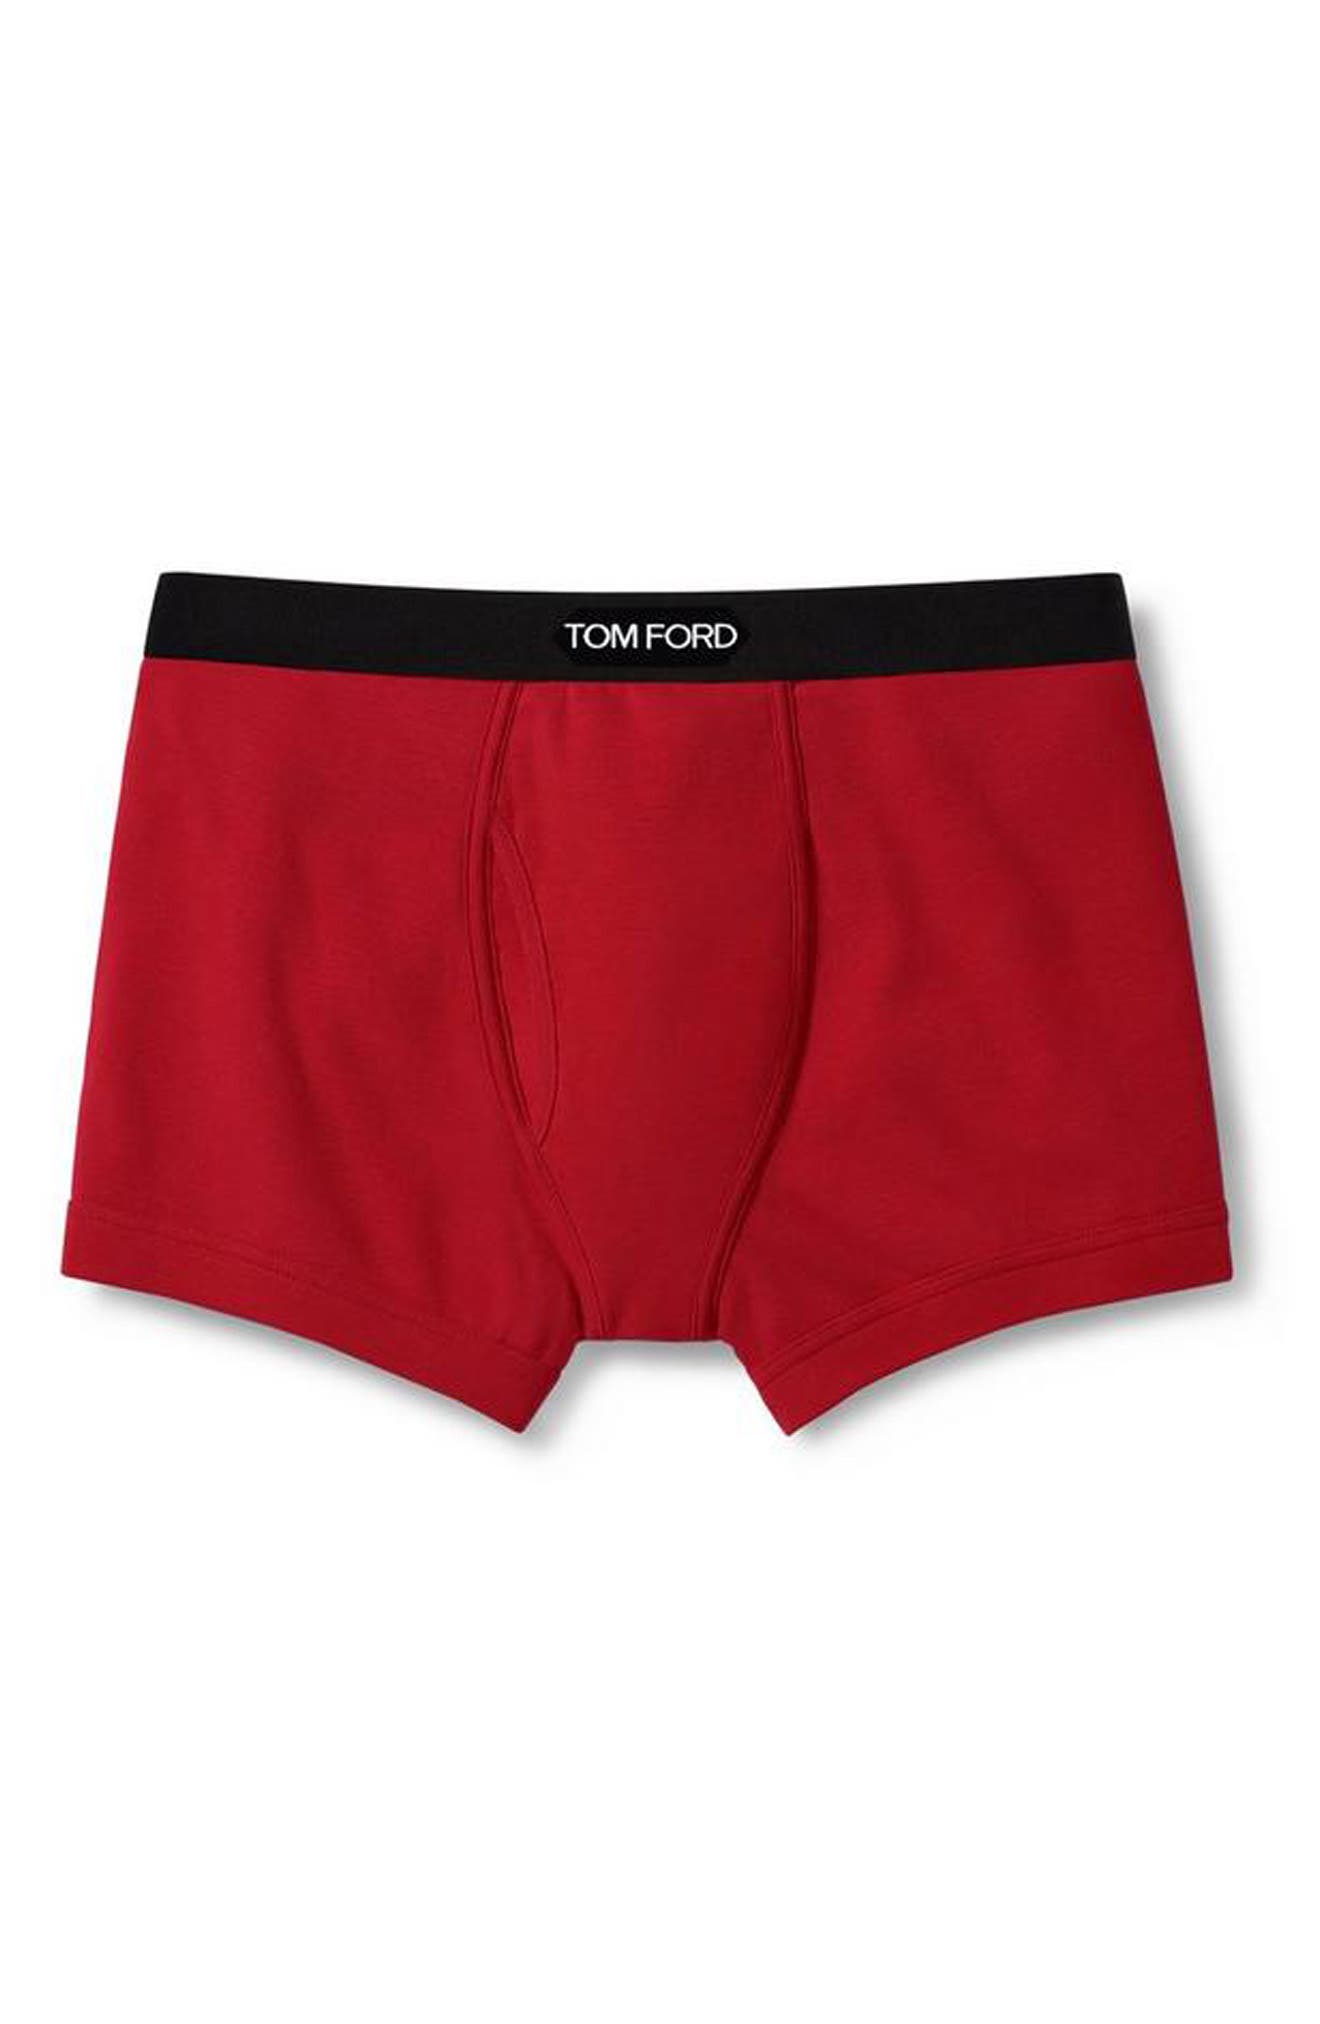 Pmftryuer Mens Red Candles Underwear Boxer Briefs Underpants